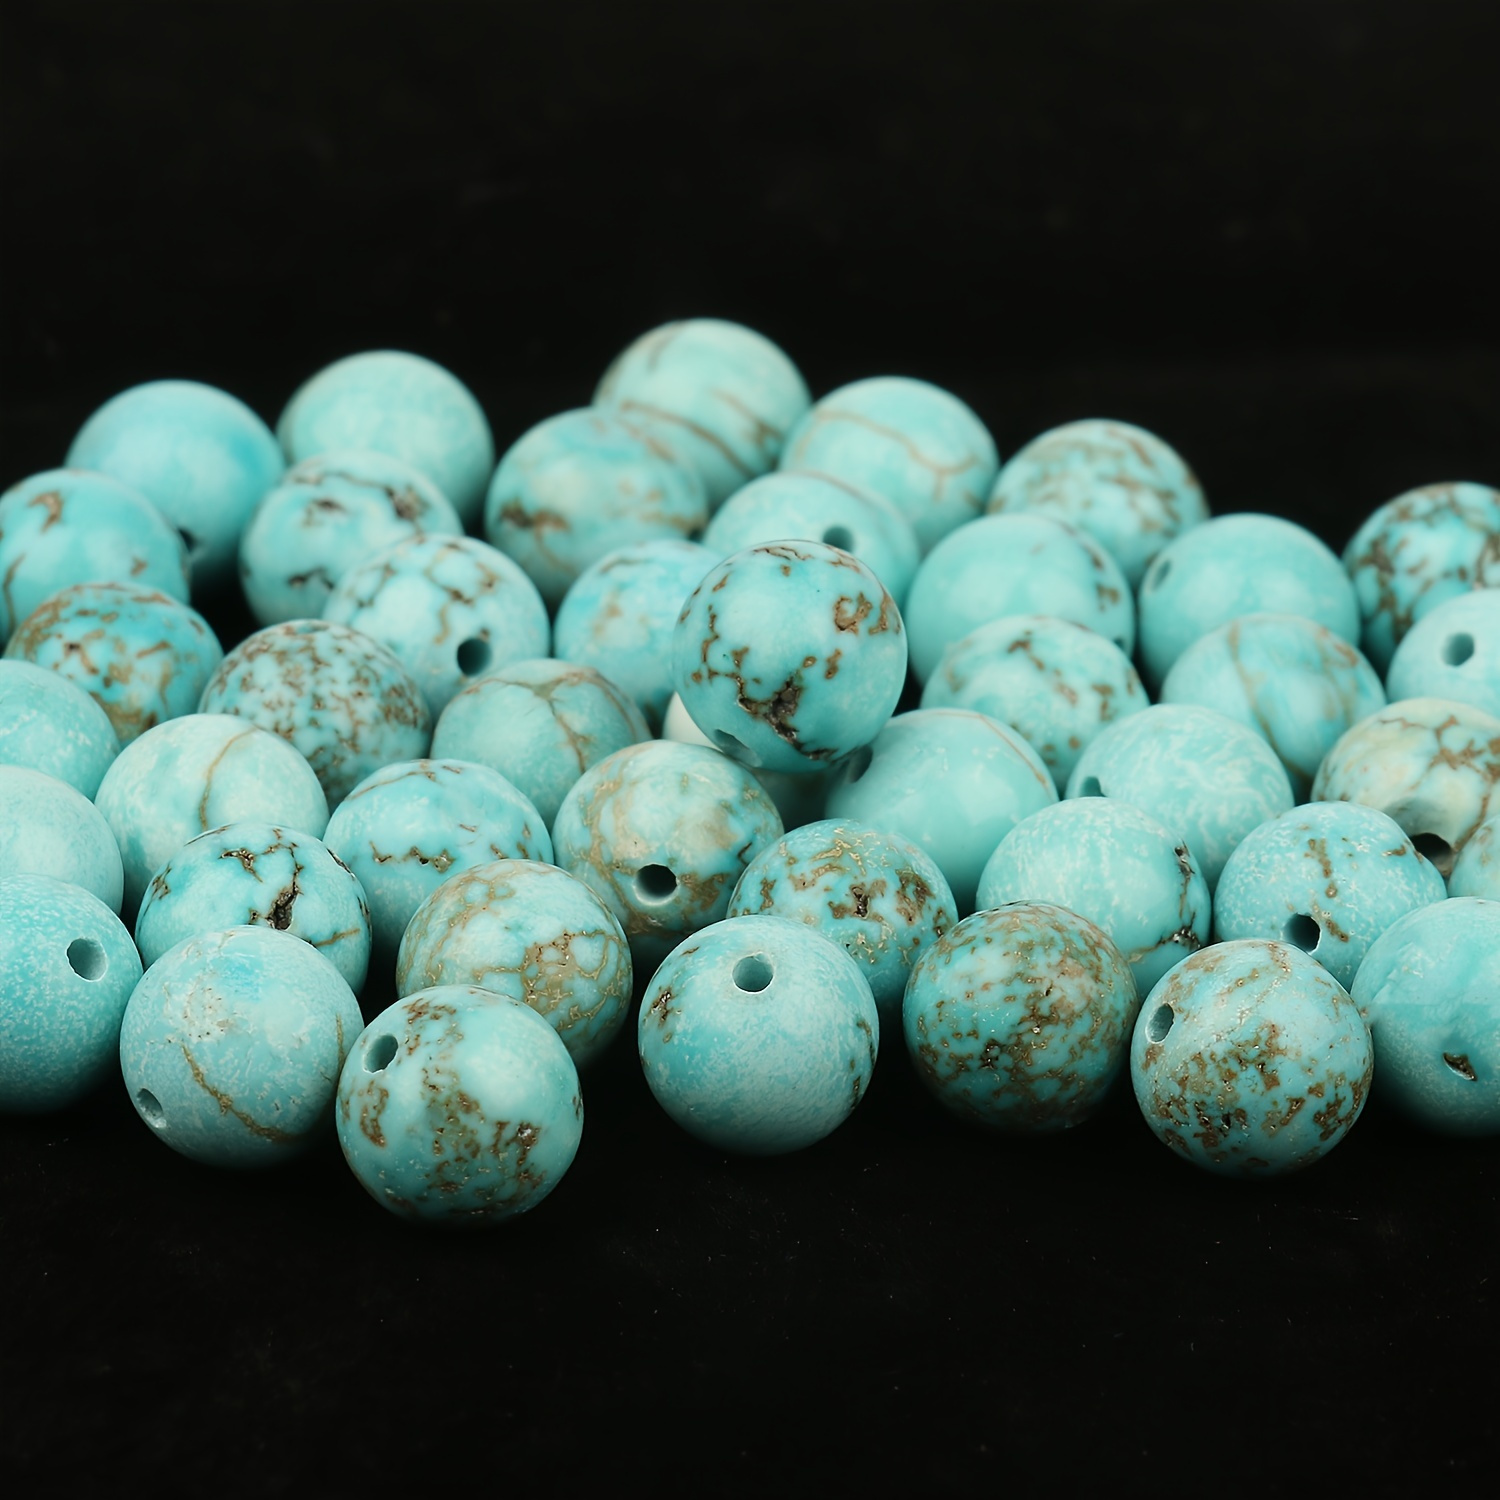  8mm Blue Turquoise Beads Round Gemstone Loose Beads for Jewelry  Making (46-48pcs/strand)